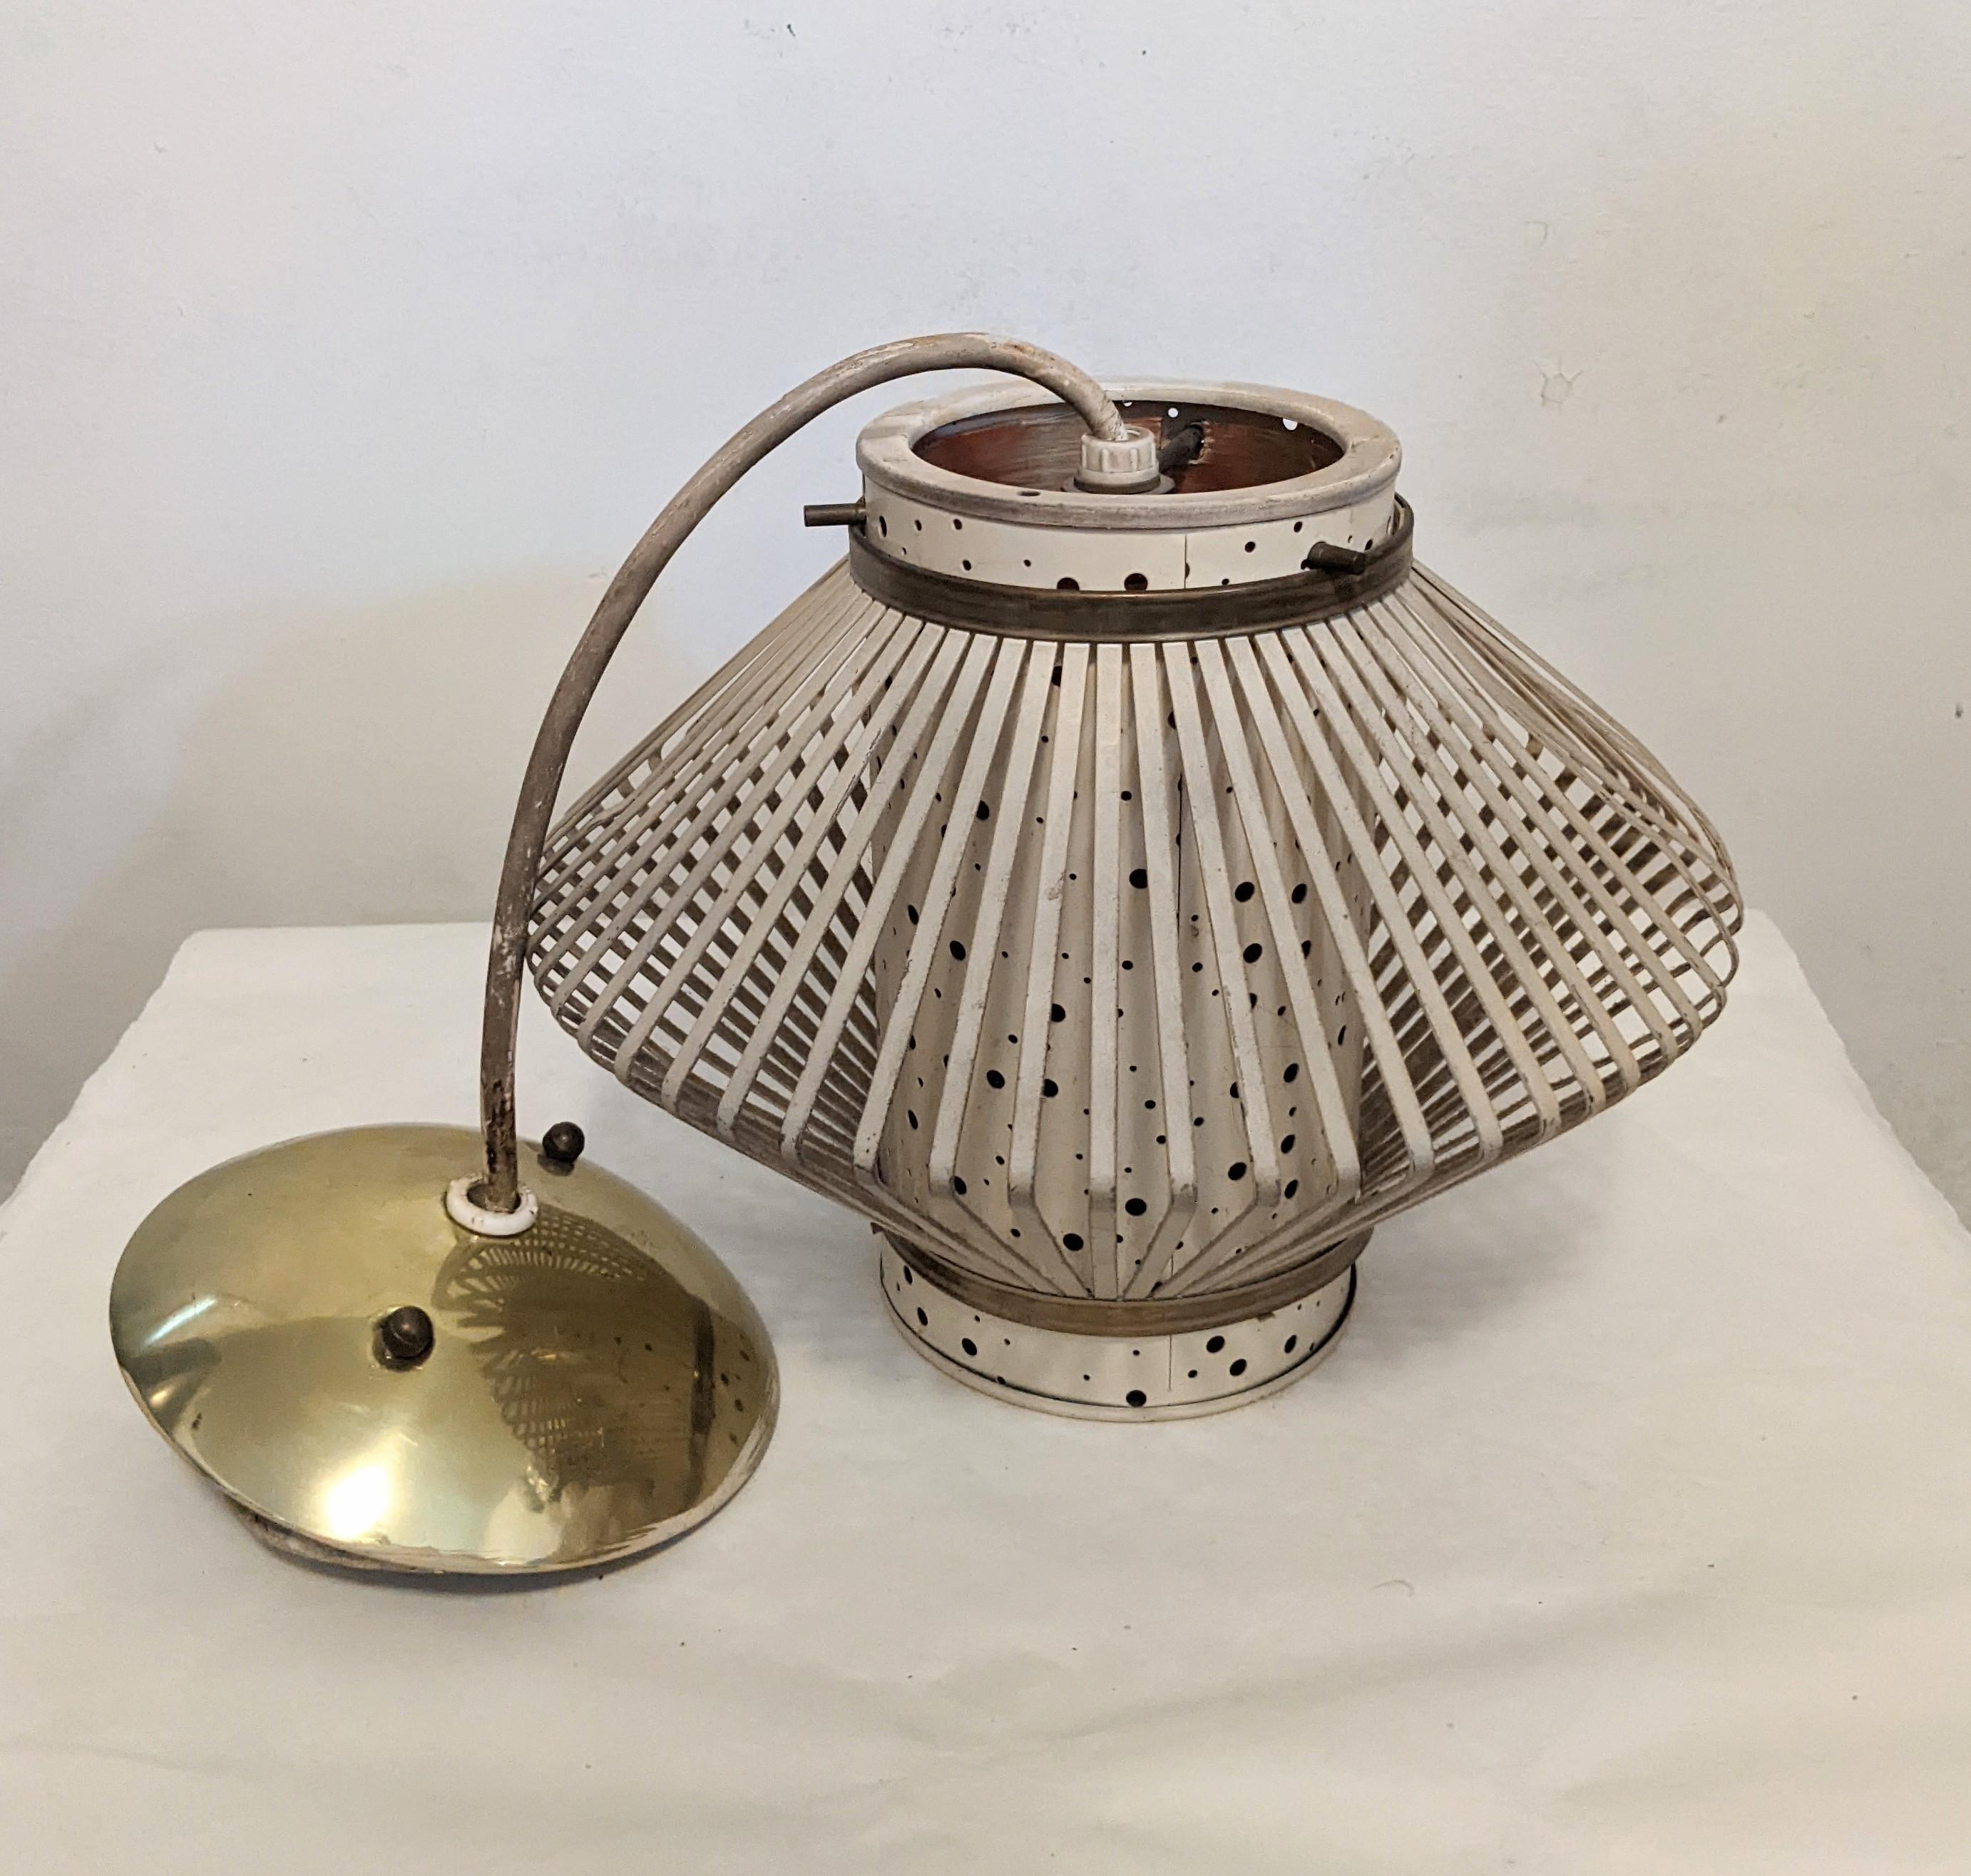 1950s Atomic style pendant lantern in enameled metal with a spun nylon interior in tones of oranges and yellow. When the fixture is lit, little dots of color emanate from within and light up a dark room. 
Fixture measures 12